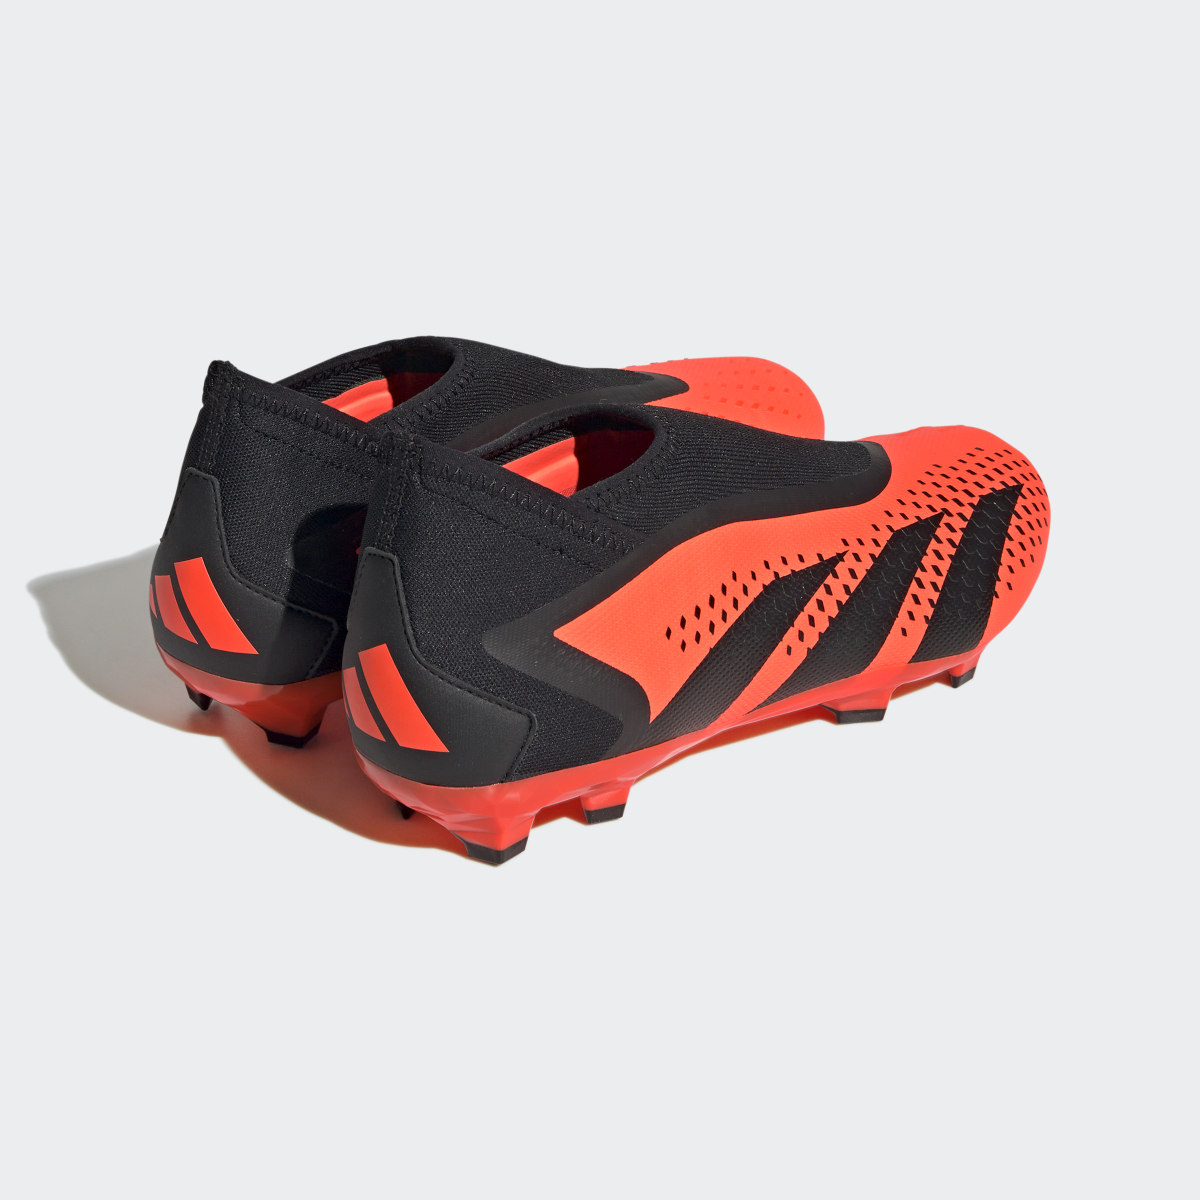 Adidas Predator Accuracy.3 Laceless Firm Ground Soccer Cleats. 6